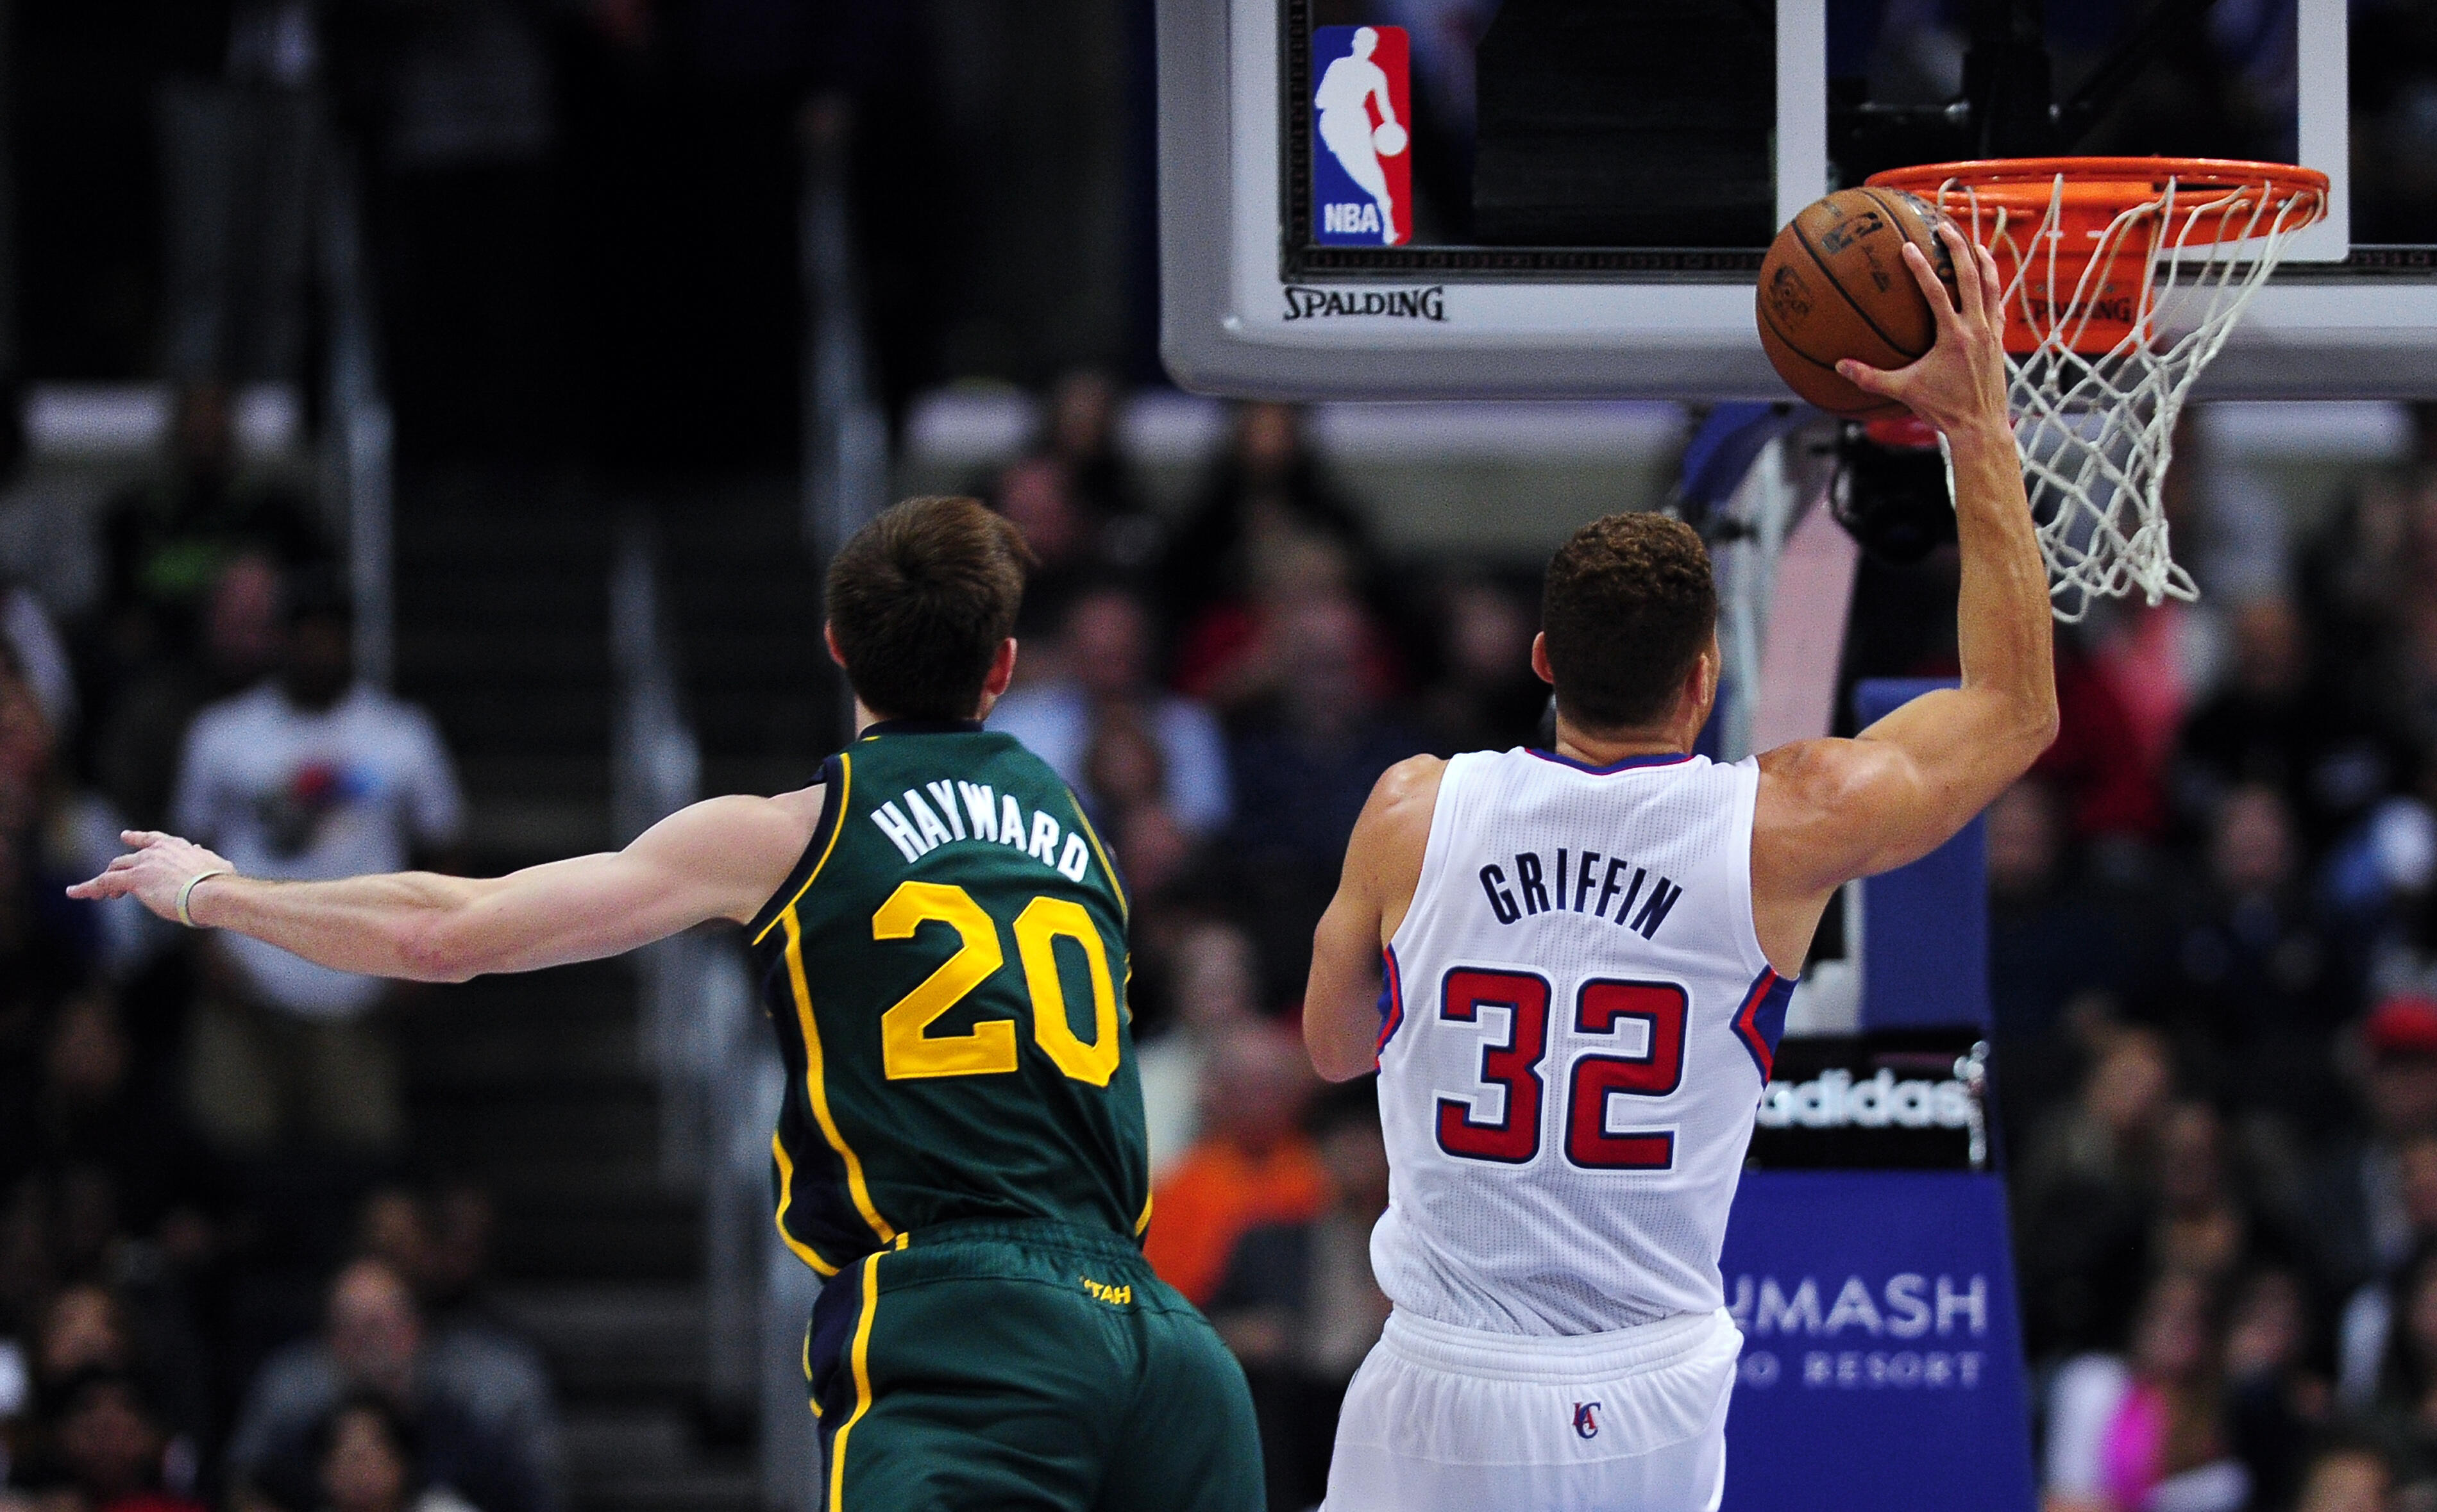 Blake Griffin of the Los Angeles Clippers gets past Gordon Hayward of the Utah Jazz to score during NBA action at the Staples Center in Los Angeles on 28 December, 2013.    AFP PHOTO/Frederic J. BROWN        (Photo credit should read FREDERIC J. BROWN/AFP